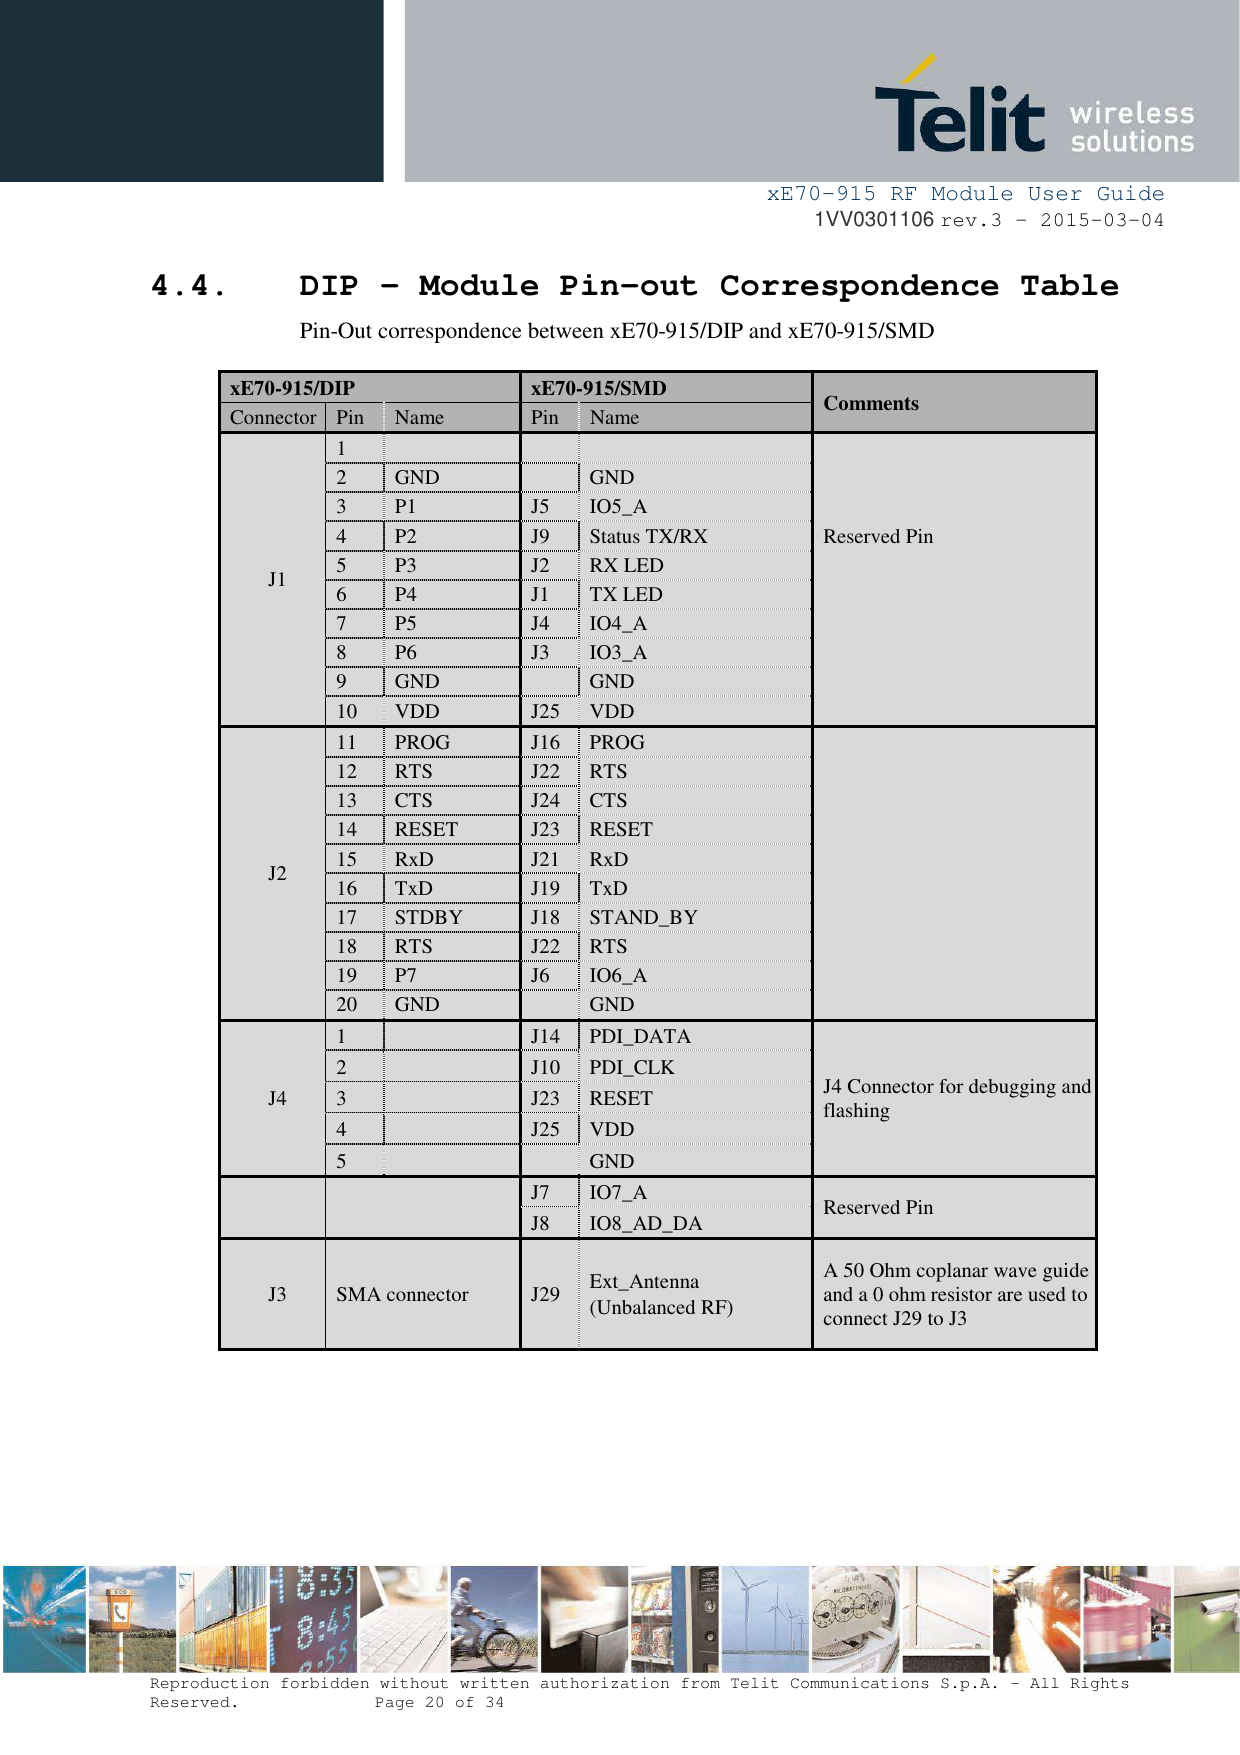     xE70-915 RF Module User Guide 1VV0301106 rev.3 – 2015-03-04  Reproduction forbidden without written authorization from Telit Communications S.p.A. - All Rights Reserved.    Page 20 of 34  4.4. DIP – Module Pin-out Correspondence Table Pin-Out correspondence between xE70-915/DIP and xE70-915/SMD  xE70-915/DIP xE70-915/SMD Comments Connector Pin   Name  Pin  Name J1 1         2  GND    GND   3  P1  J5  IO5_A   4  P2  J9  Status TX/RX  Reserved Pin 5  P3  J2  RX LED   6  P4  J1  TX LED   7  P5  J4  IO4_A   8  P6  J3  IO3_A   9  GND    GND   10  VDD  J25  VDD   J2 11  PROG  J16  PROG   12  RTS  J22  RTS   13  CTS  J24  CTS   14  RESET  J23  RESET   15  RxD  J21  RxD   16  TxD  J19  TxD   17  STDBY  J18  STAND_BY   18  RTS  J22  RTS   19  P7  J6  IO6_A   20  GND    GND   J4 1    J14  PDI_DATA J4 Connector for debugging and flashing 2    J10  PDI_CLK 3    J23  RESET 4    J25  VDD 5      GND    J7  IO7_A  Reserved Pin   J8  IO8_AD_DA J3  SMA connector   J29  Ext_Antenna (Unbalanced RF) A 50 Ohm coplanar wave guide and a 0 ohm resistor are used to connect J29 to J3  